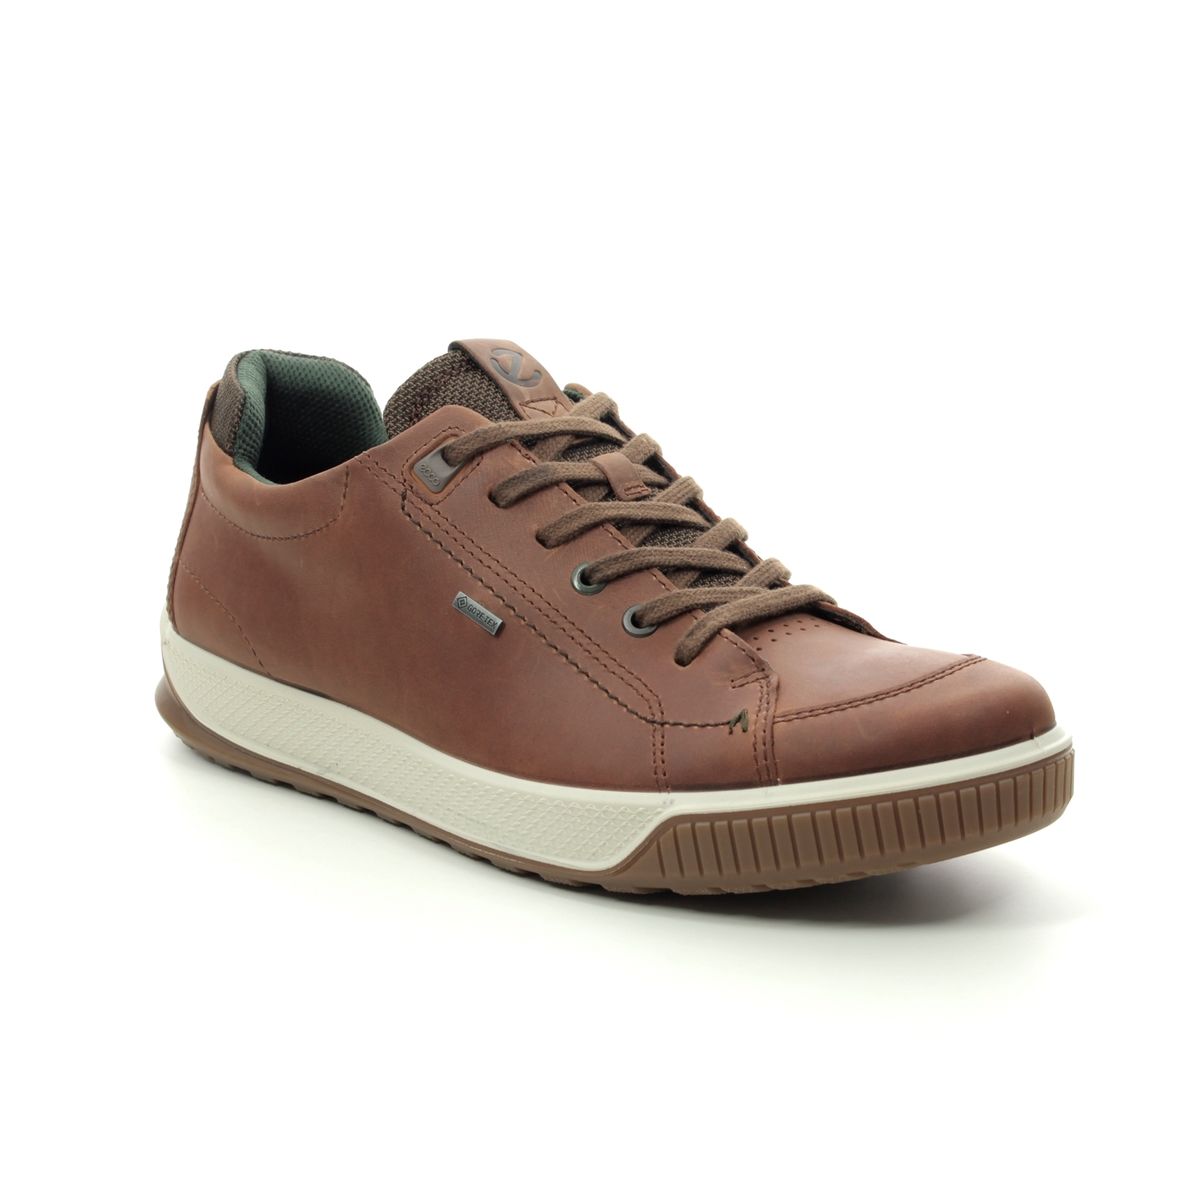 ECCO Byway Tred Gore Tan Leather Mens comfort shoes 501824-02280